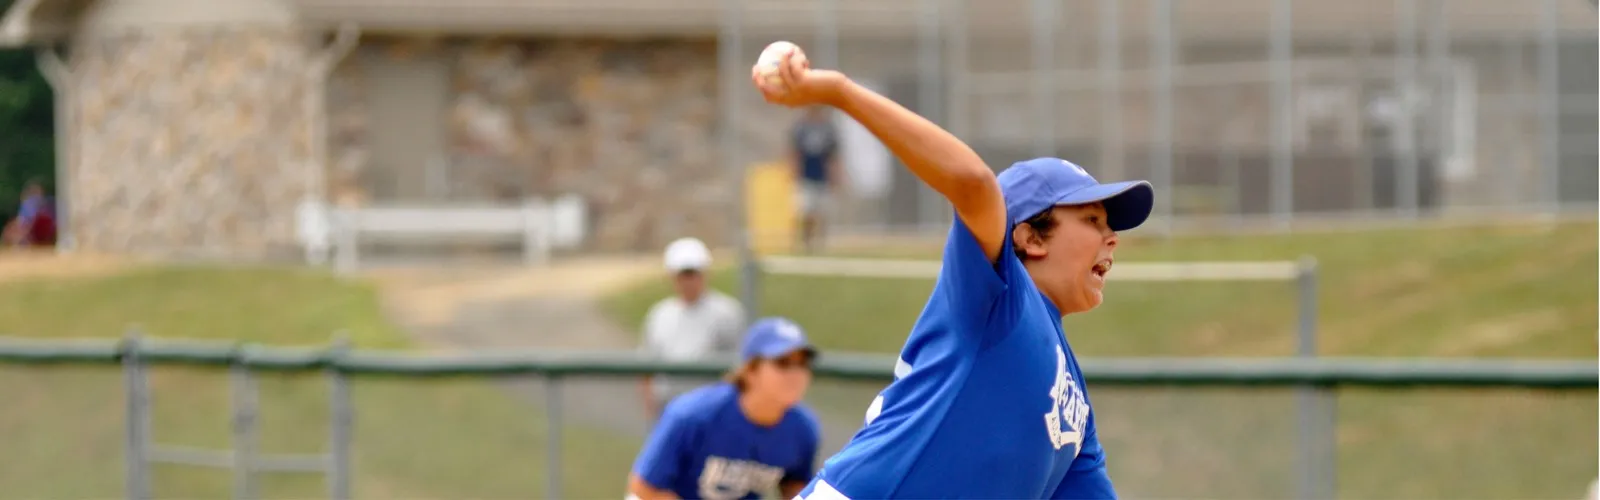 how repetitive throwing motions can lead to Little League Elbow.